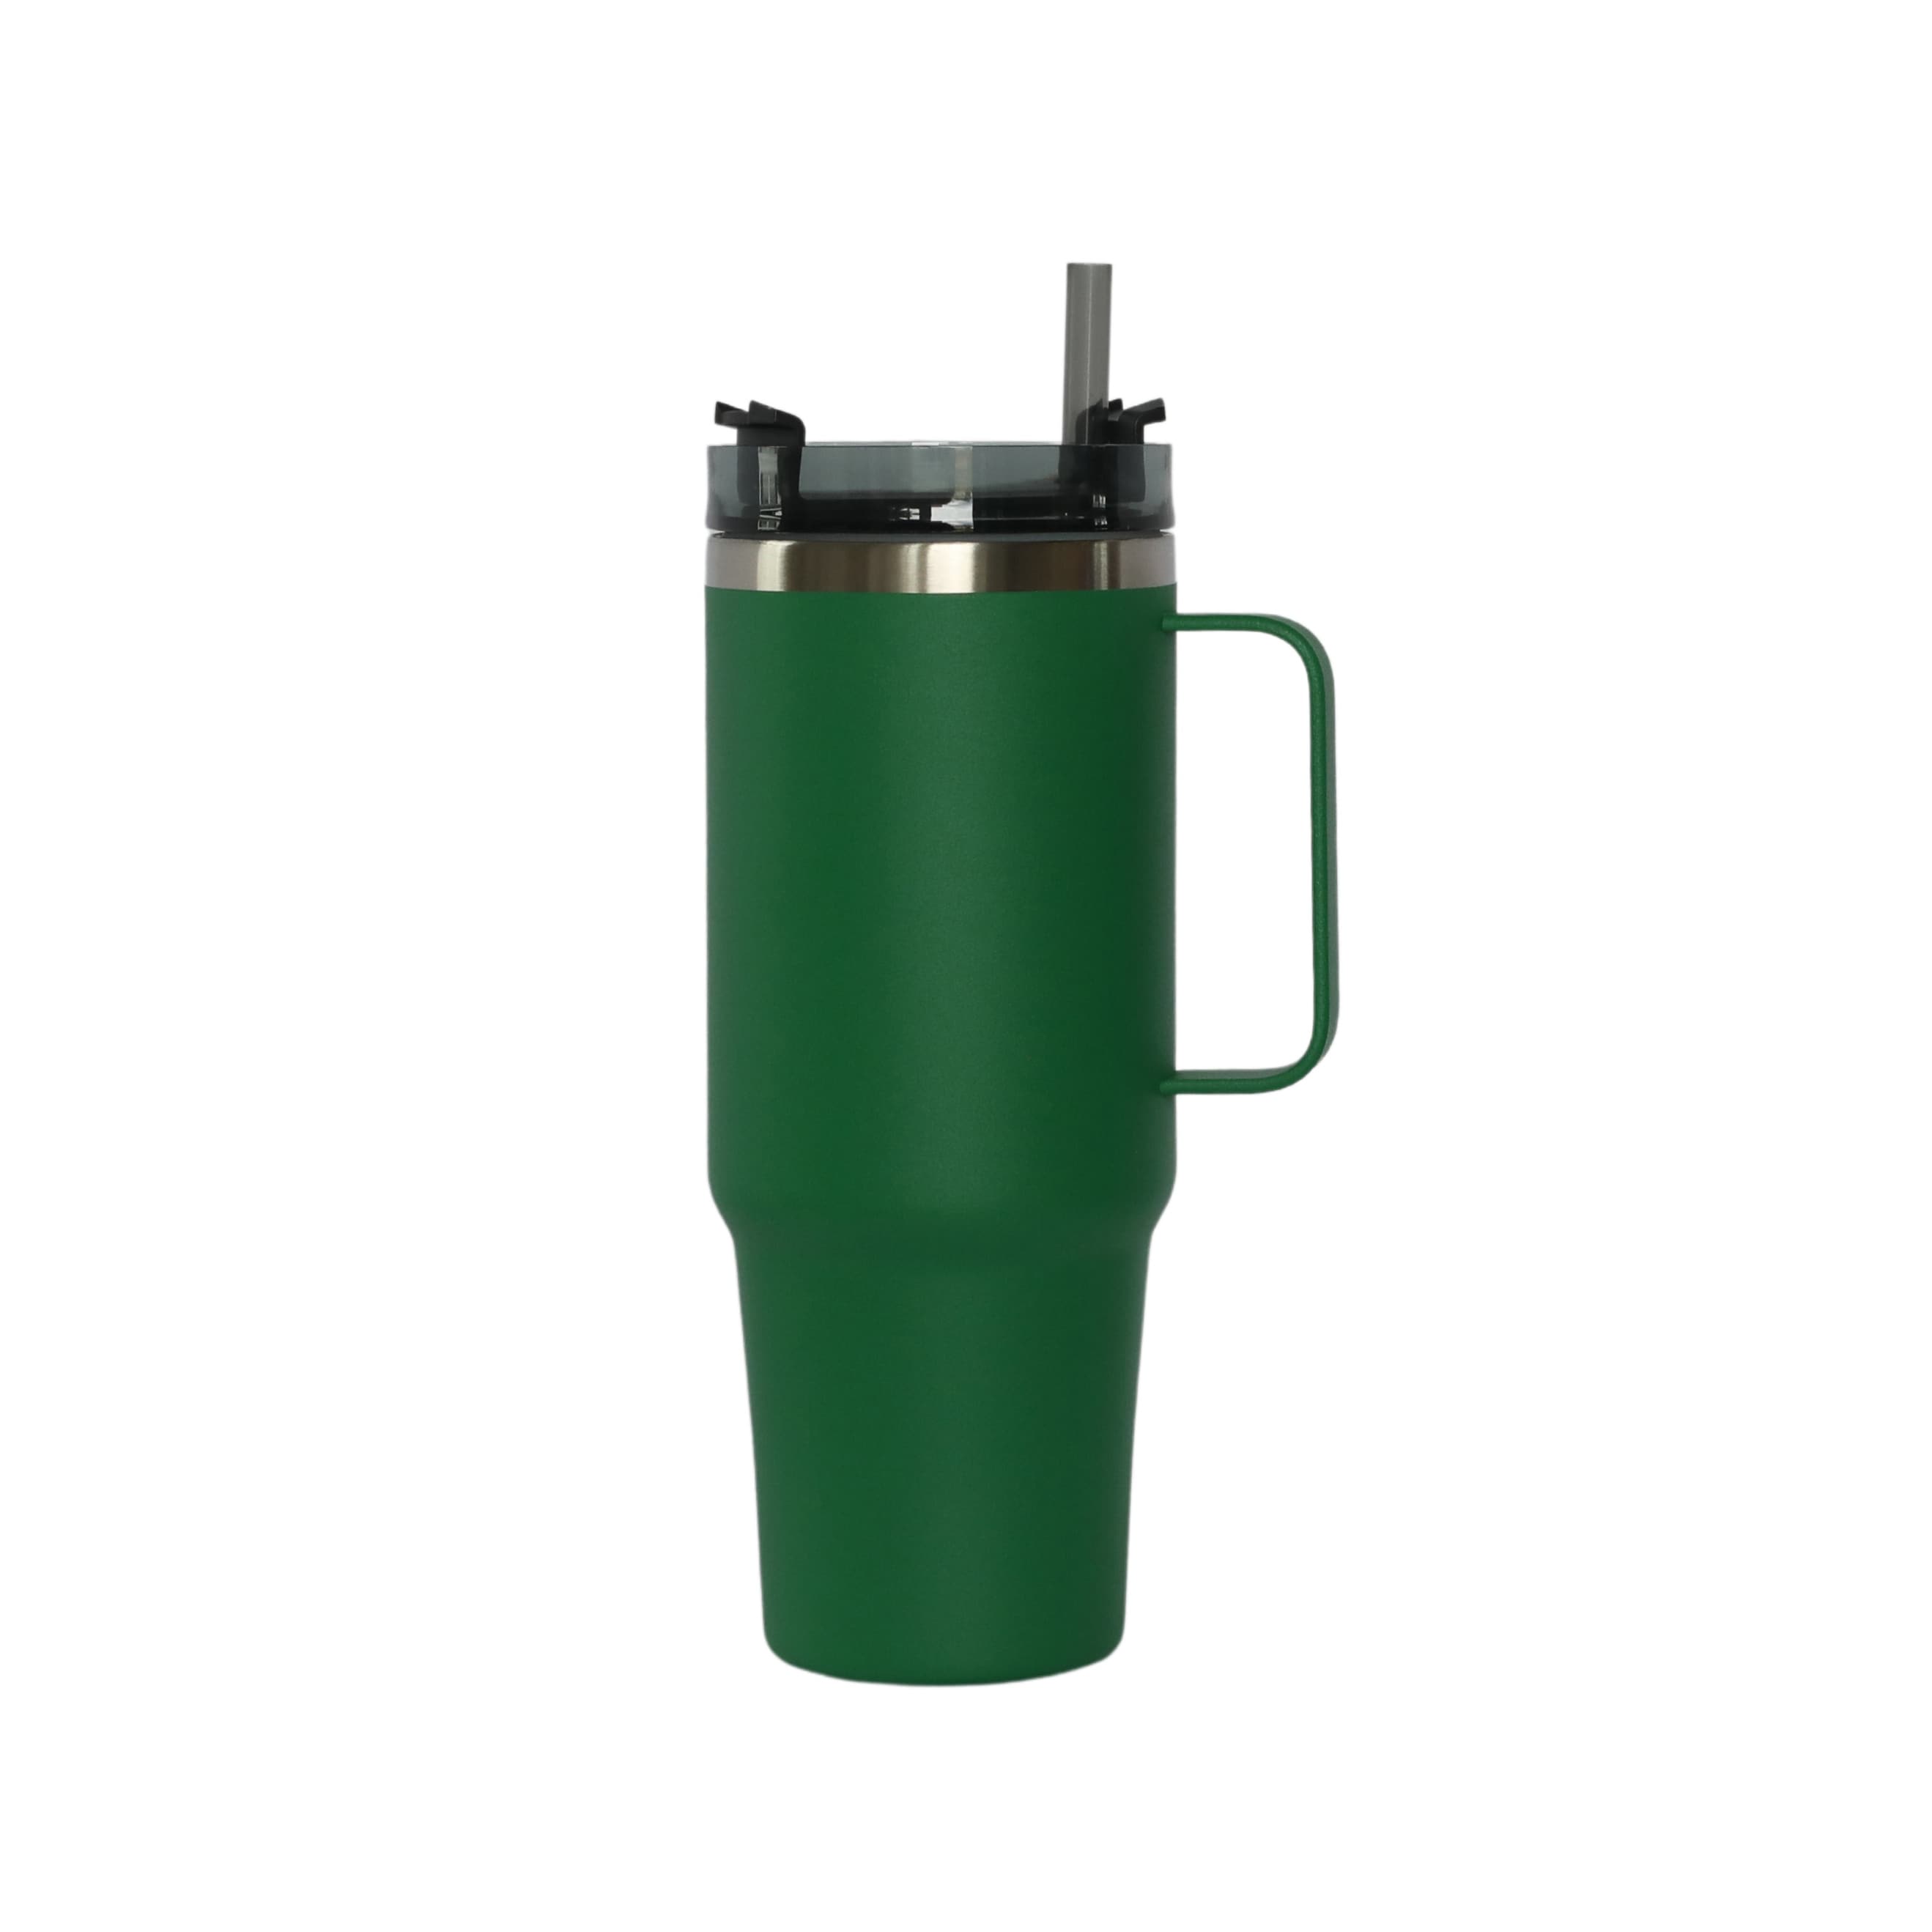 https://ak1.ostkcdn.com/images/products/is/images/direct/360590c74ca67b2f3360f17acc271f92124f4a08/Travel-Mug-with-Handle-%26-Straw%2C-30-Oz-SS.jpg